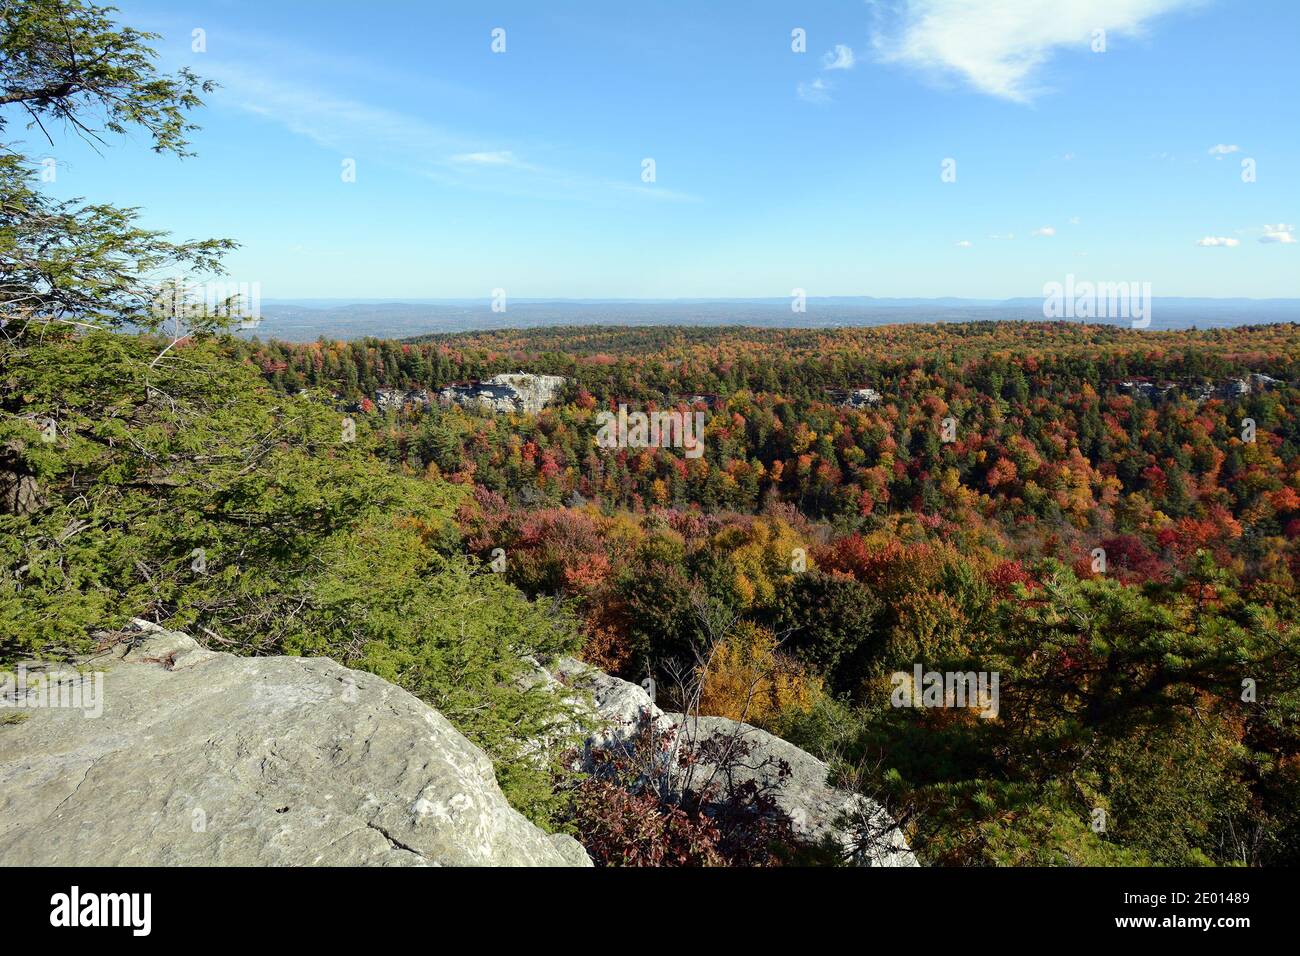 Fall Foliage from a Scenic Viewpoint off the Castle Point Carriage Path in the Shawangunk Mountains of Lake Minnewaska State Park Preserve, New York Stock Photo